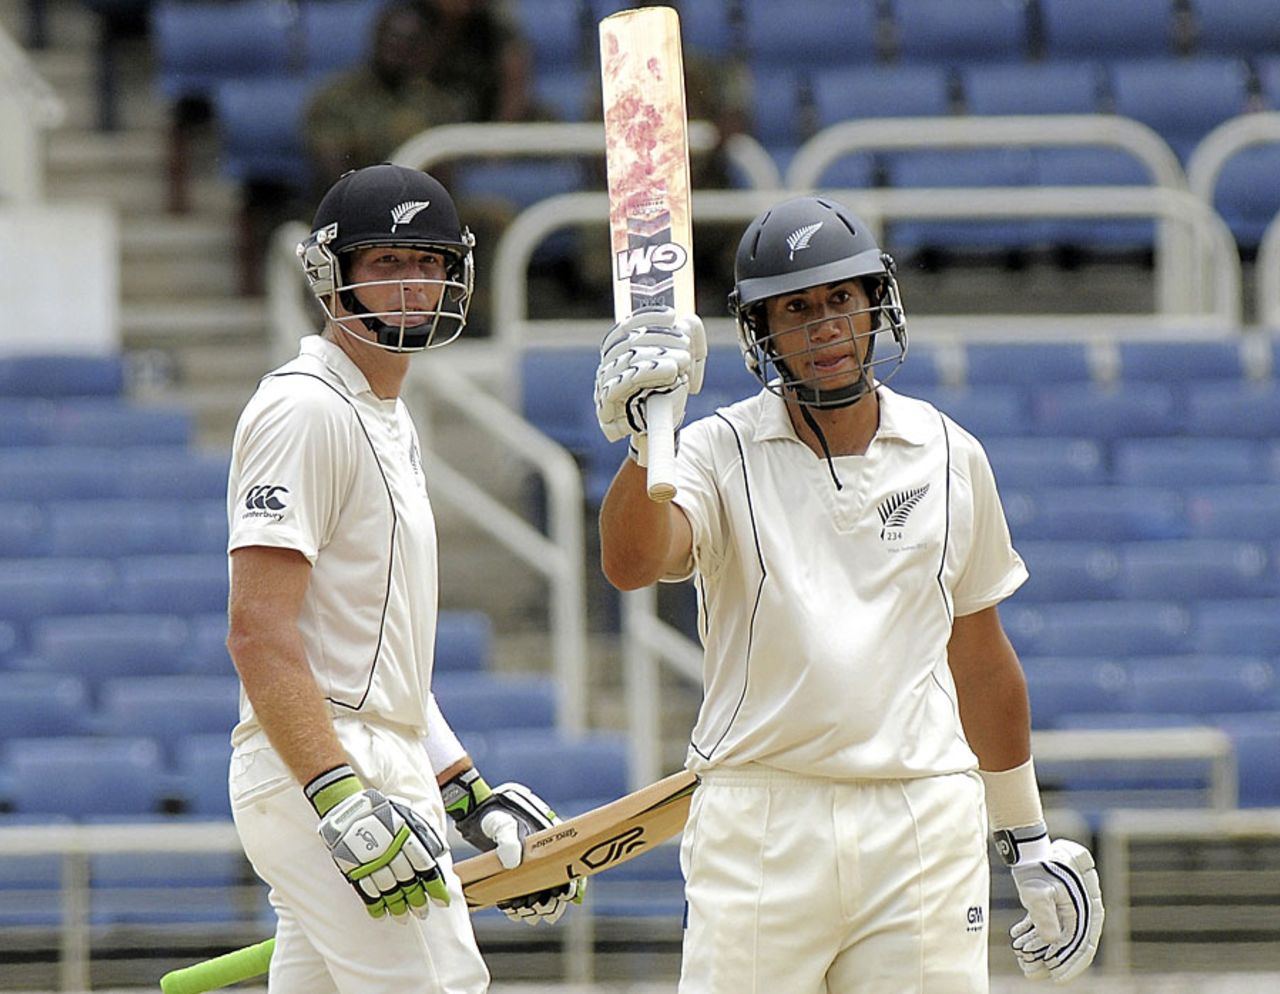 Ross Taylor celebrates his fifty as Martin Guptill looks on, West Indies v New Zealand, 2nd Test, Jamaica, 1st day, August 2, 2012